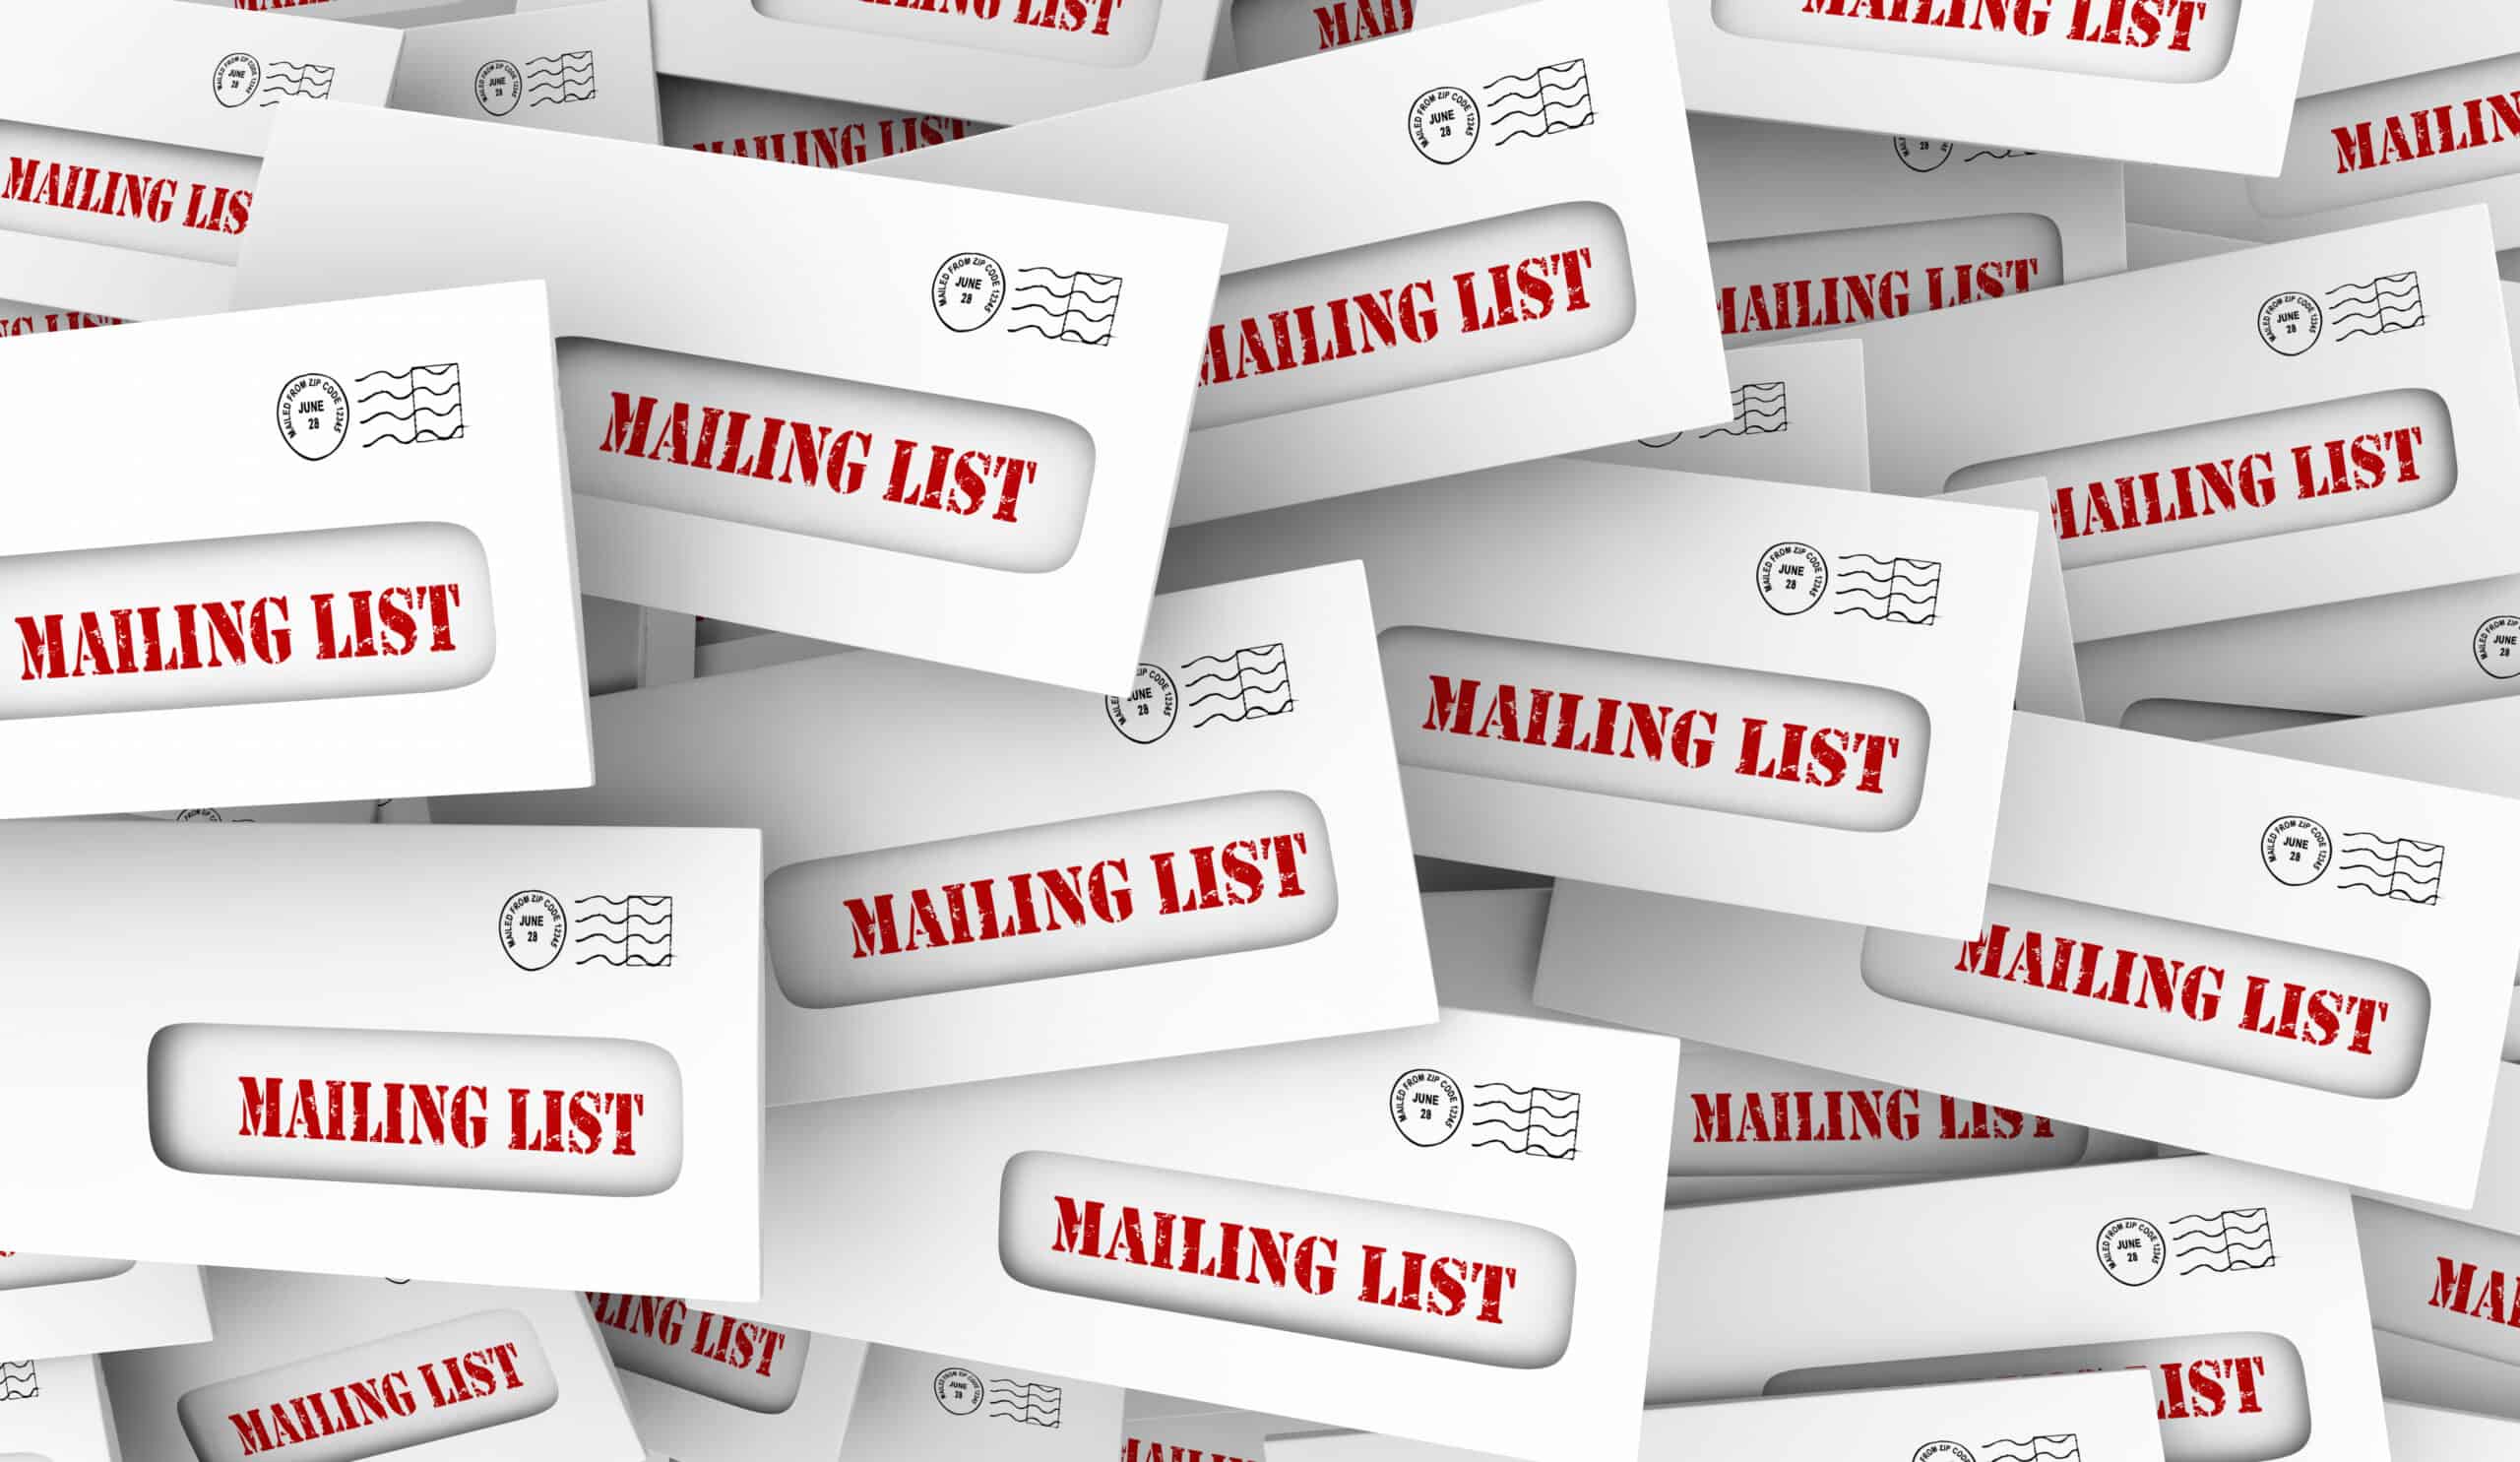 5 Benefits of Having an Up-to-Date Mailing List